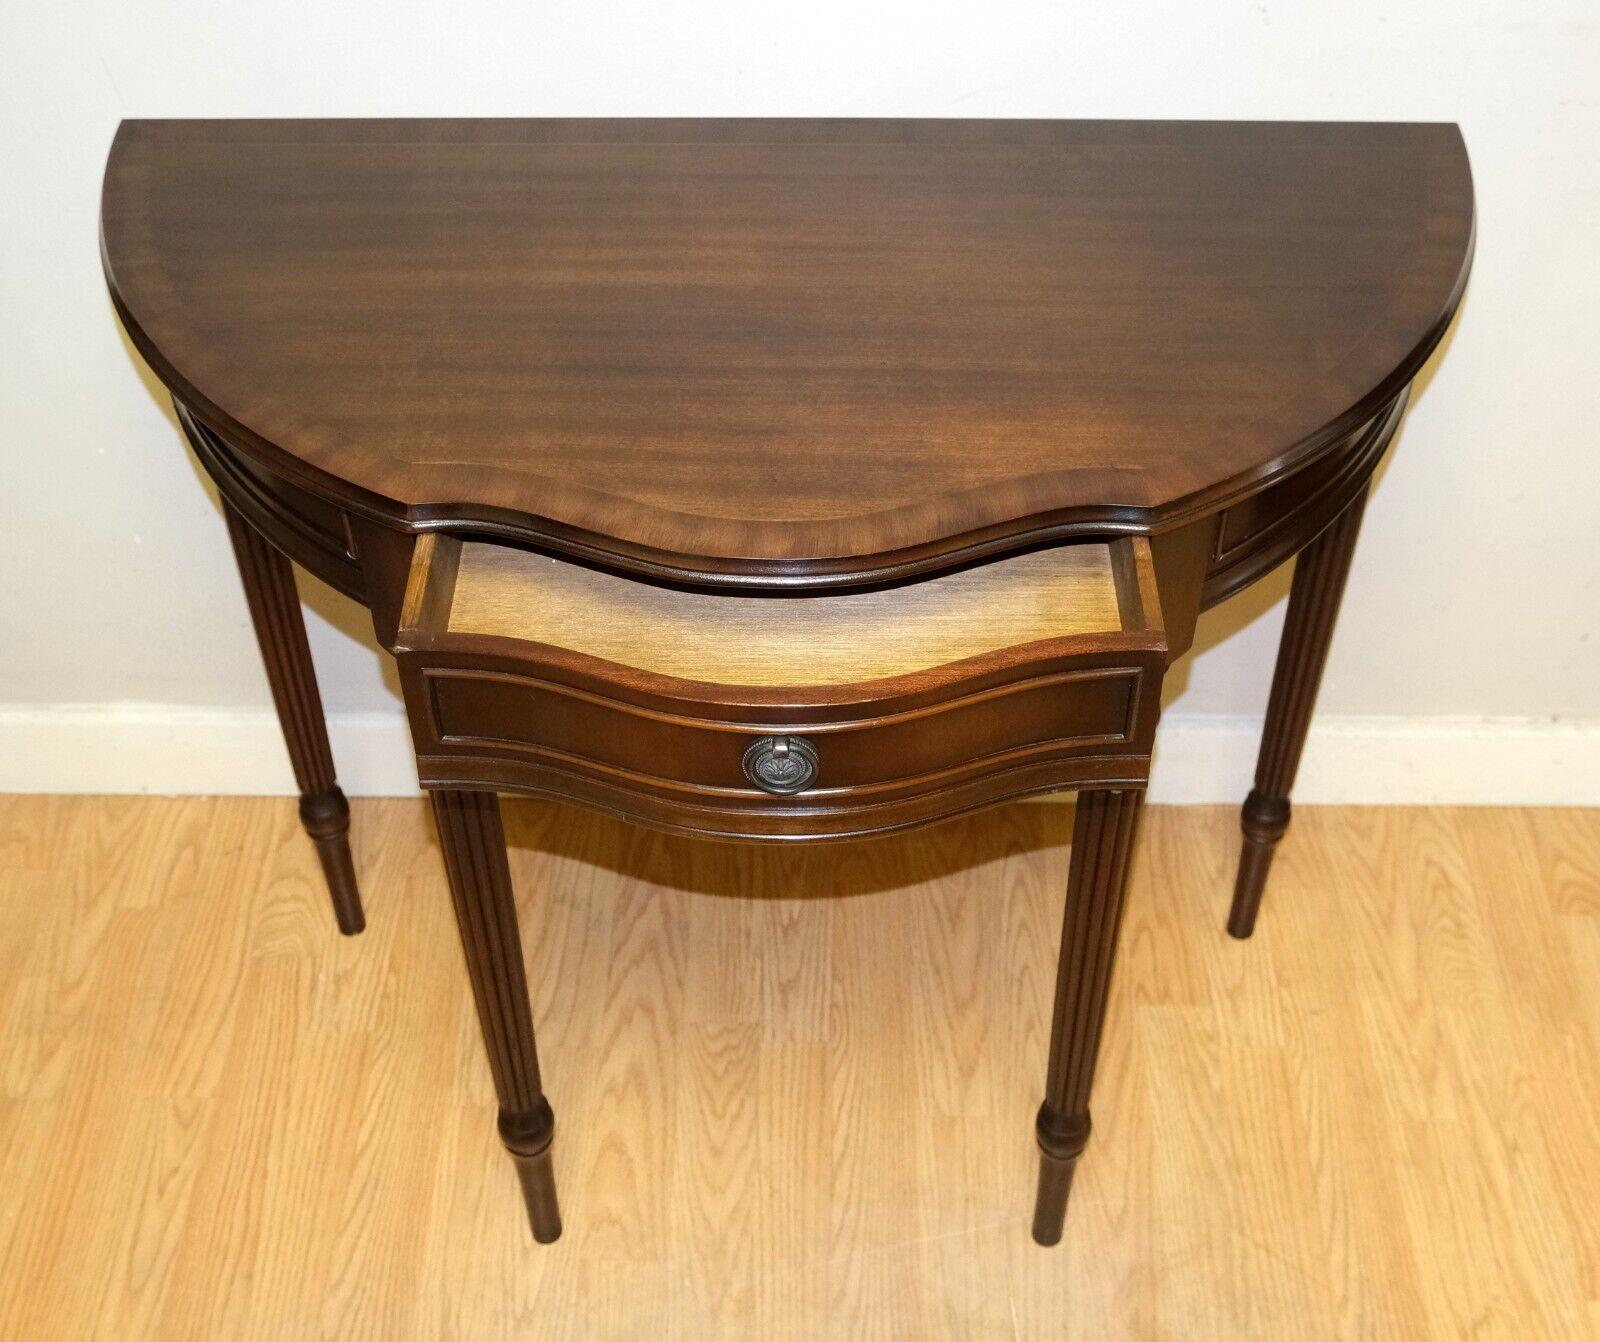 Victorian Charming Antique Brown Hardwood Demi Lune Console Table with Single Drawer